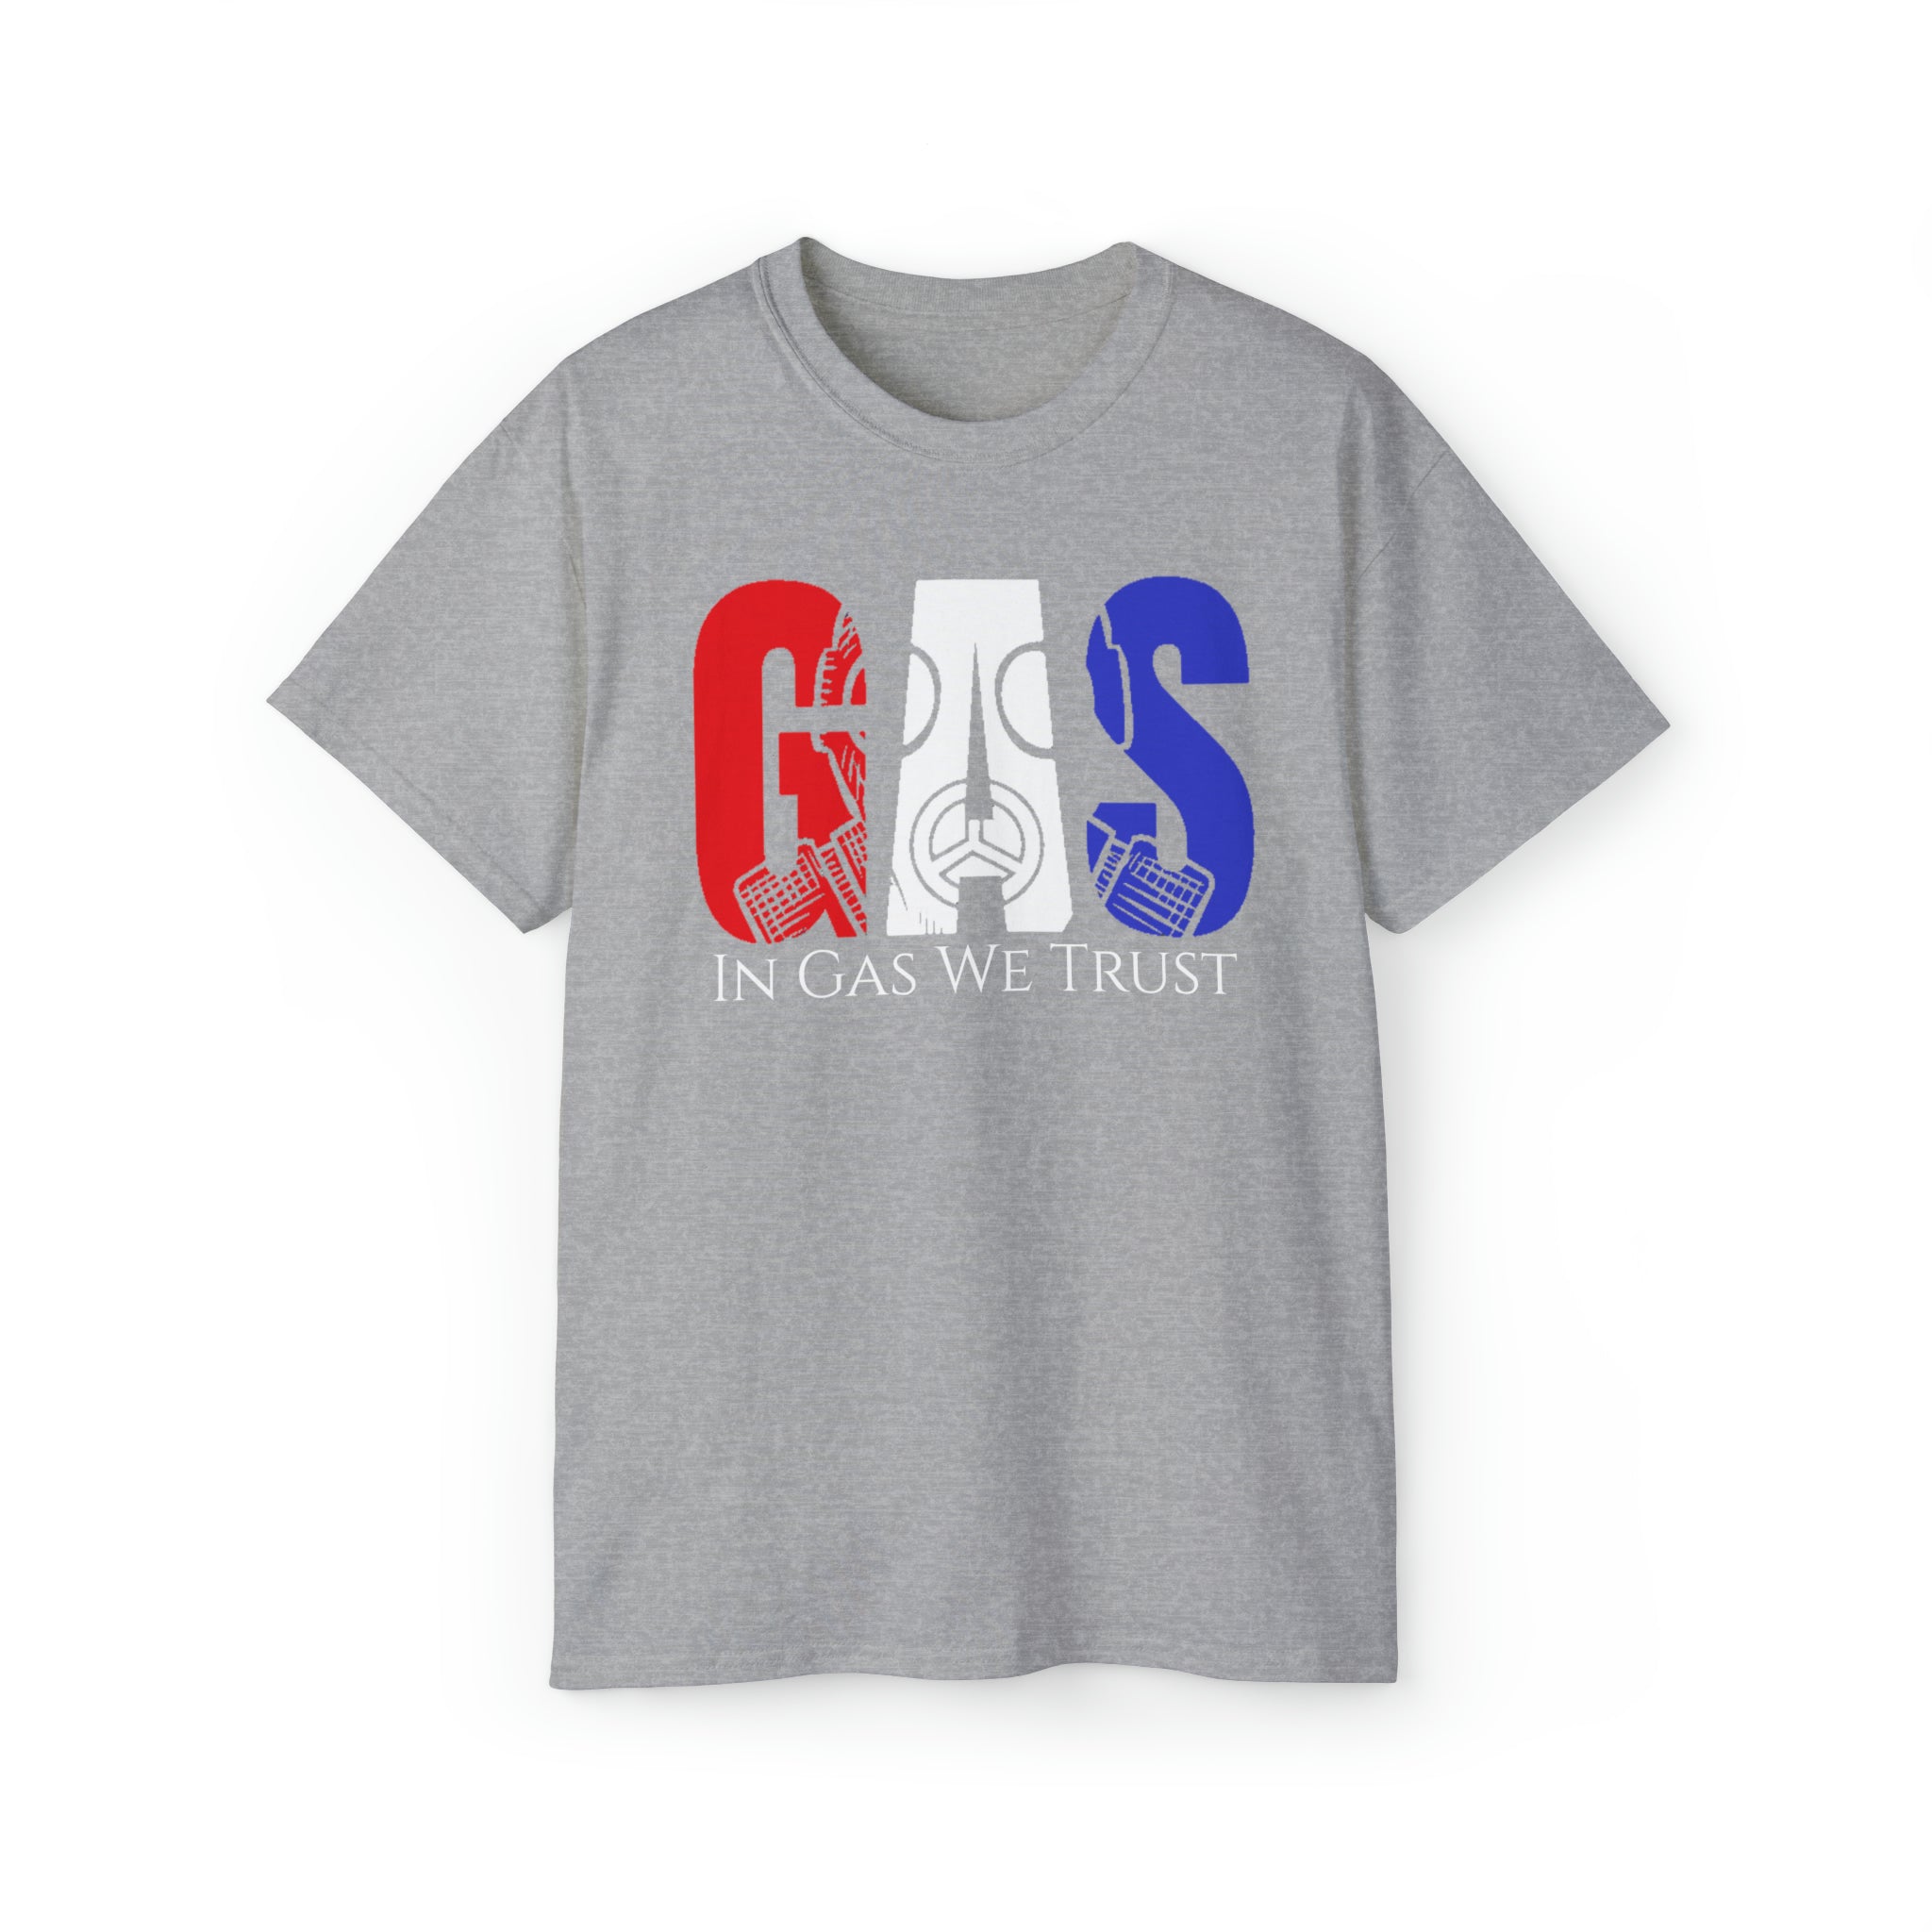 AmericanPuerto Rican Culture Colored Unisex Gas Tee